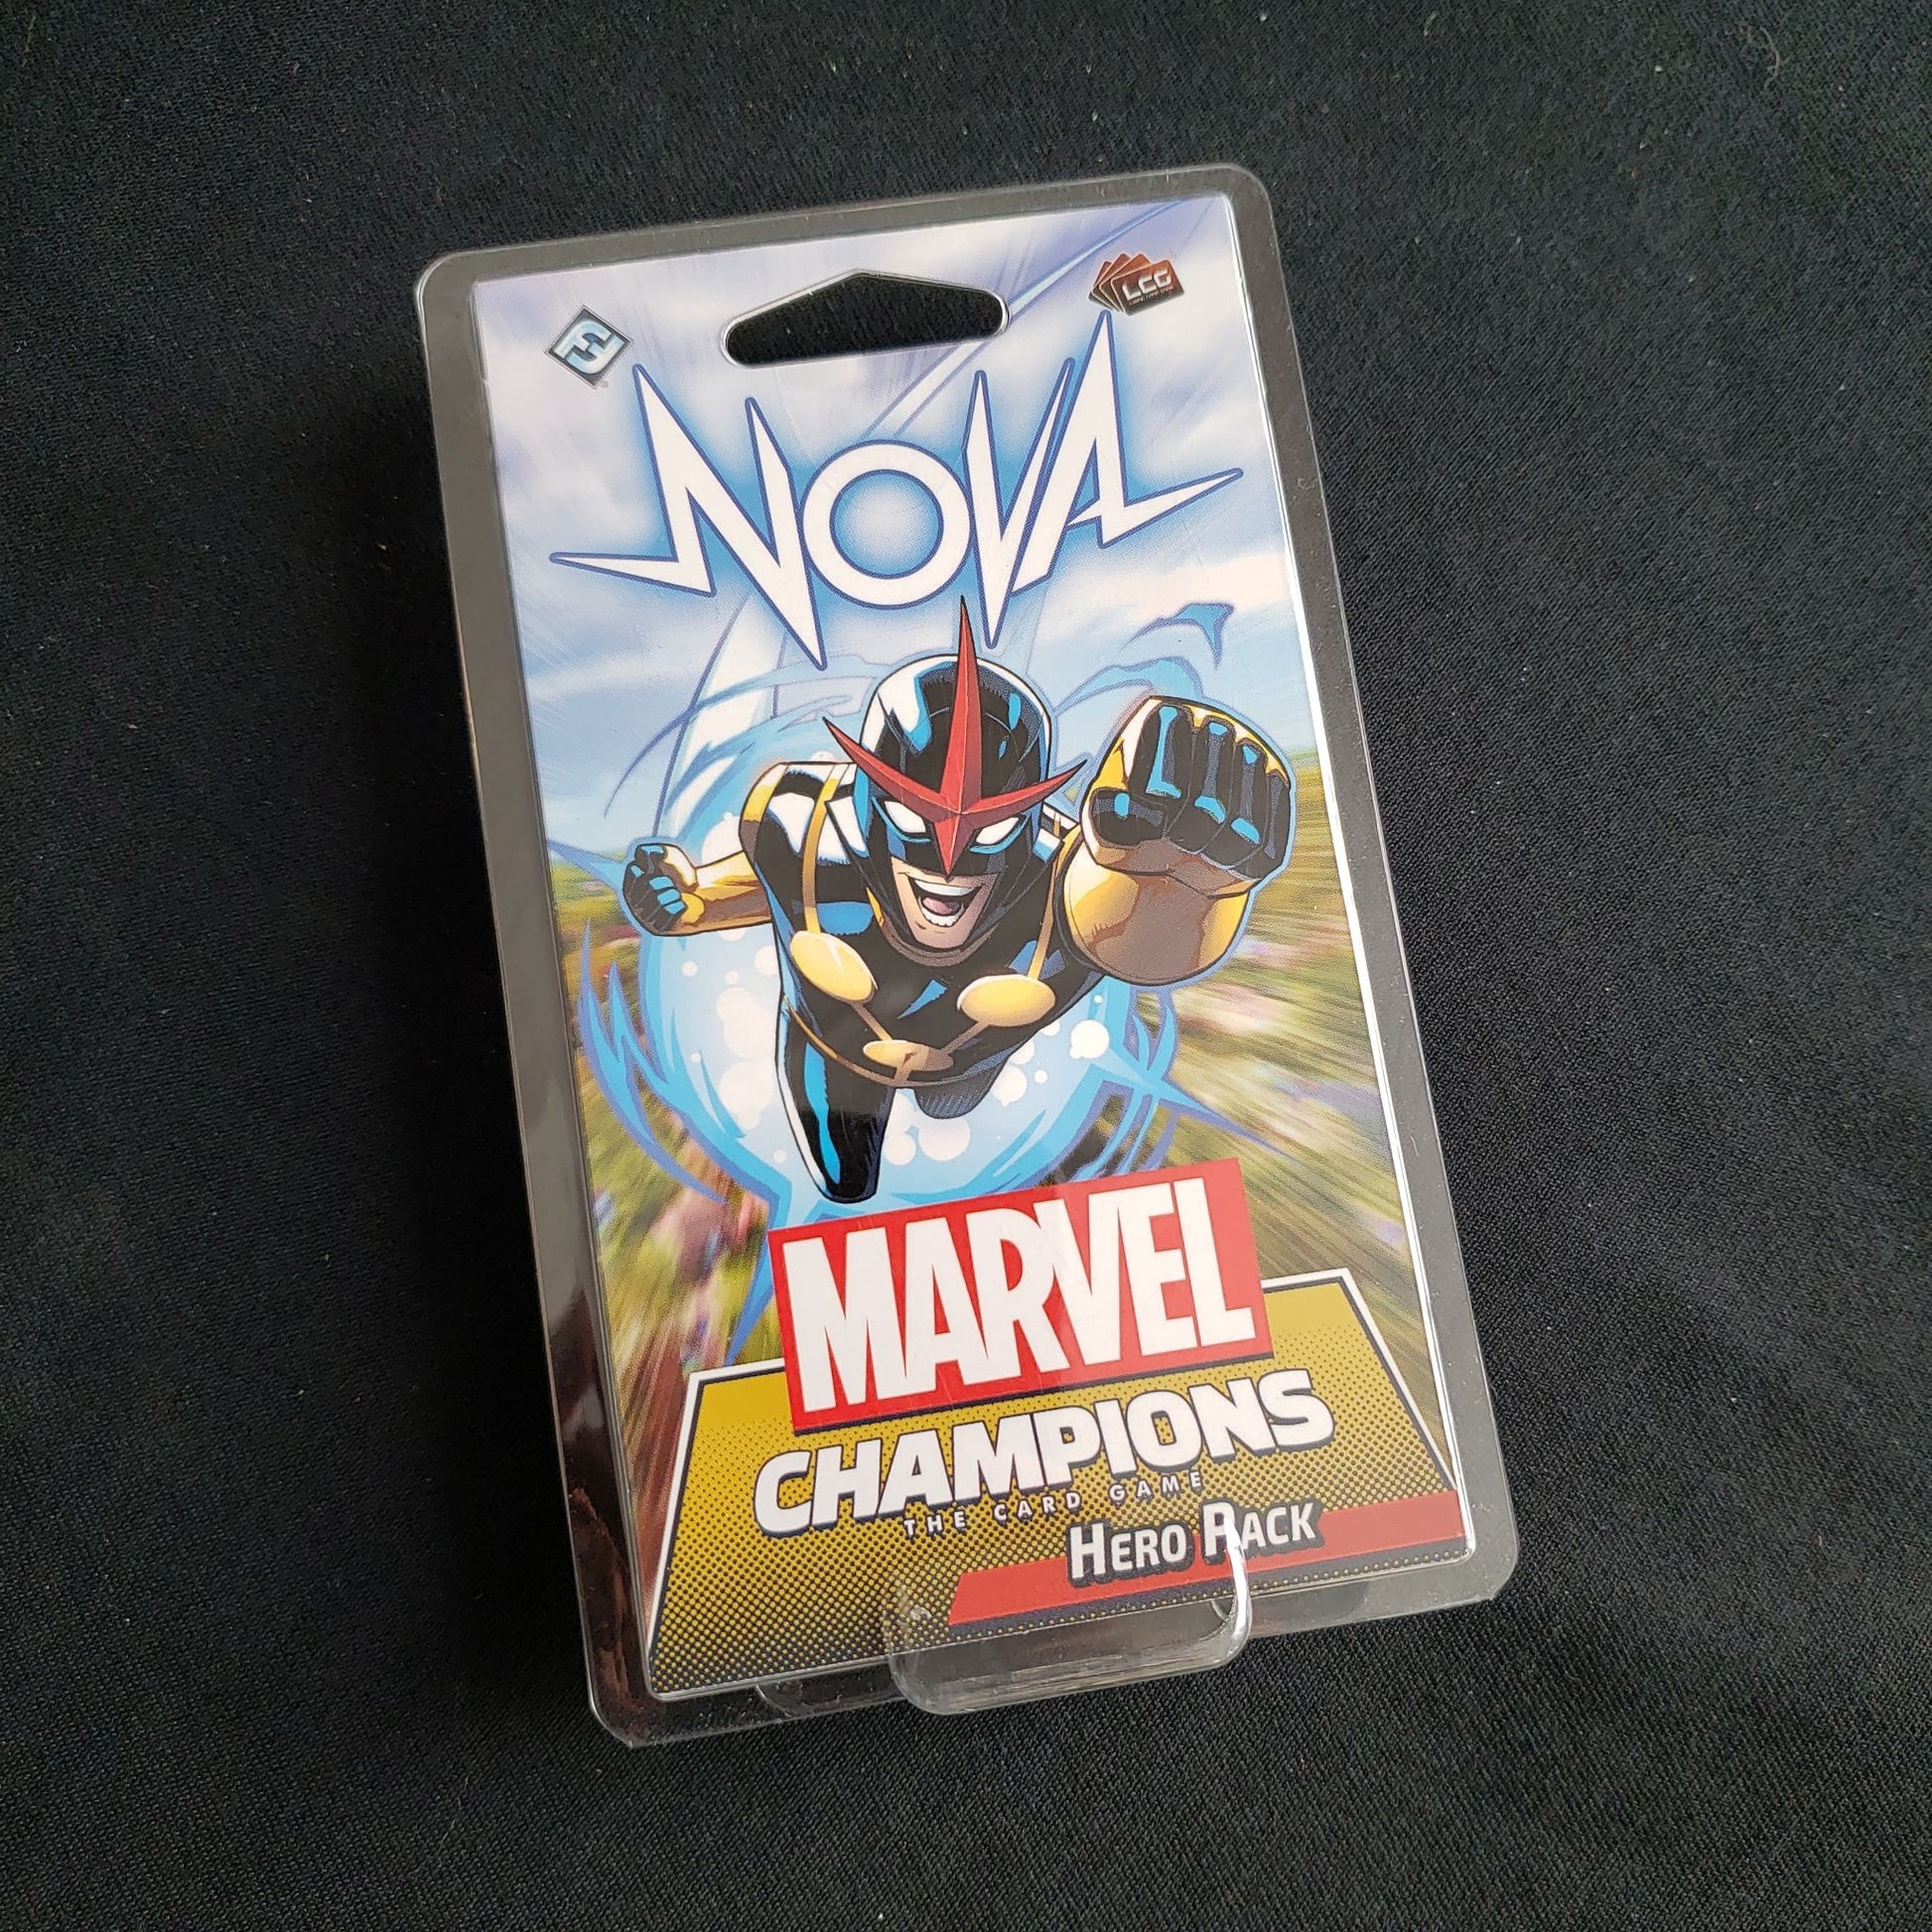 Image shows the front of the package for the Nova Hero Pack for the Marvel Champions card game